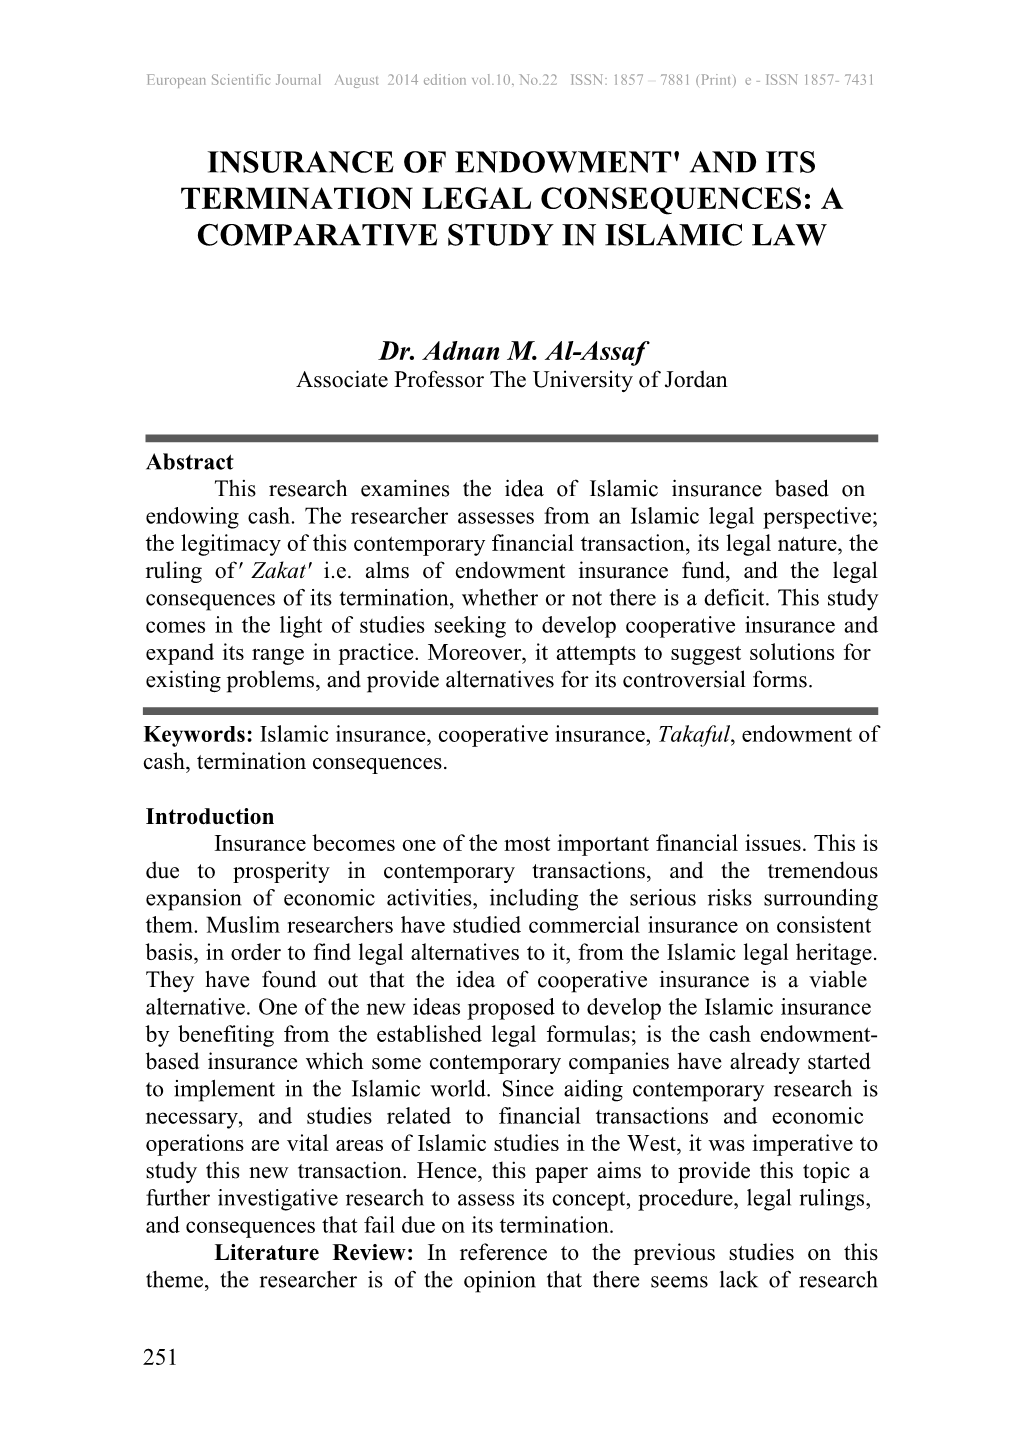 Insurance of Endowment' and Its Termination Legal Consequences: a Comparative Study in Islamic Law